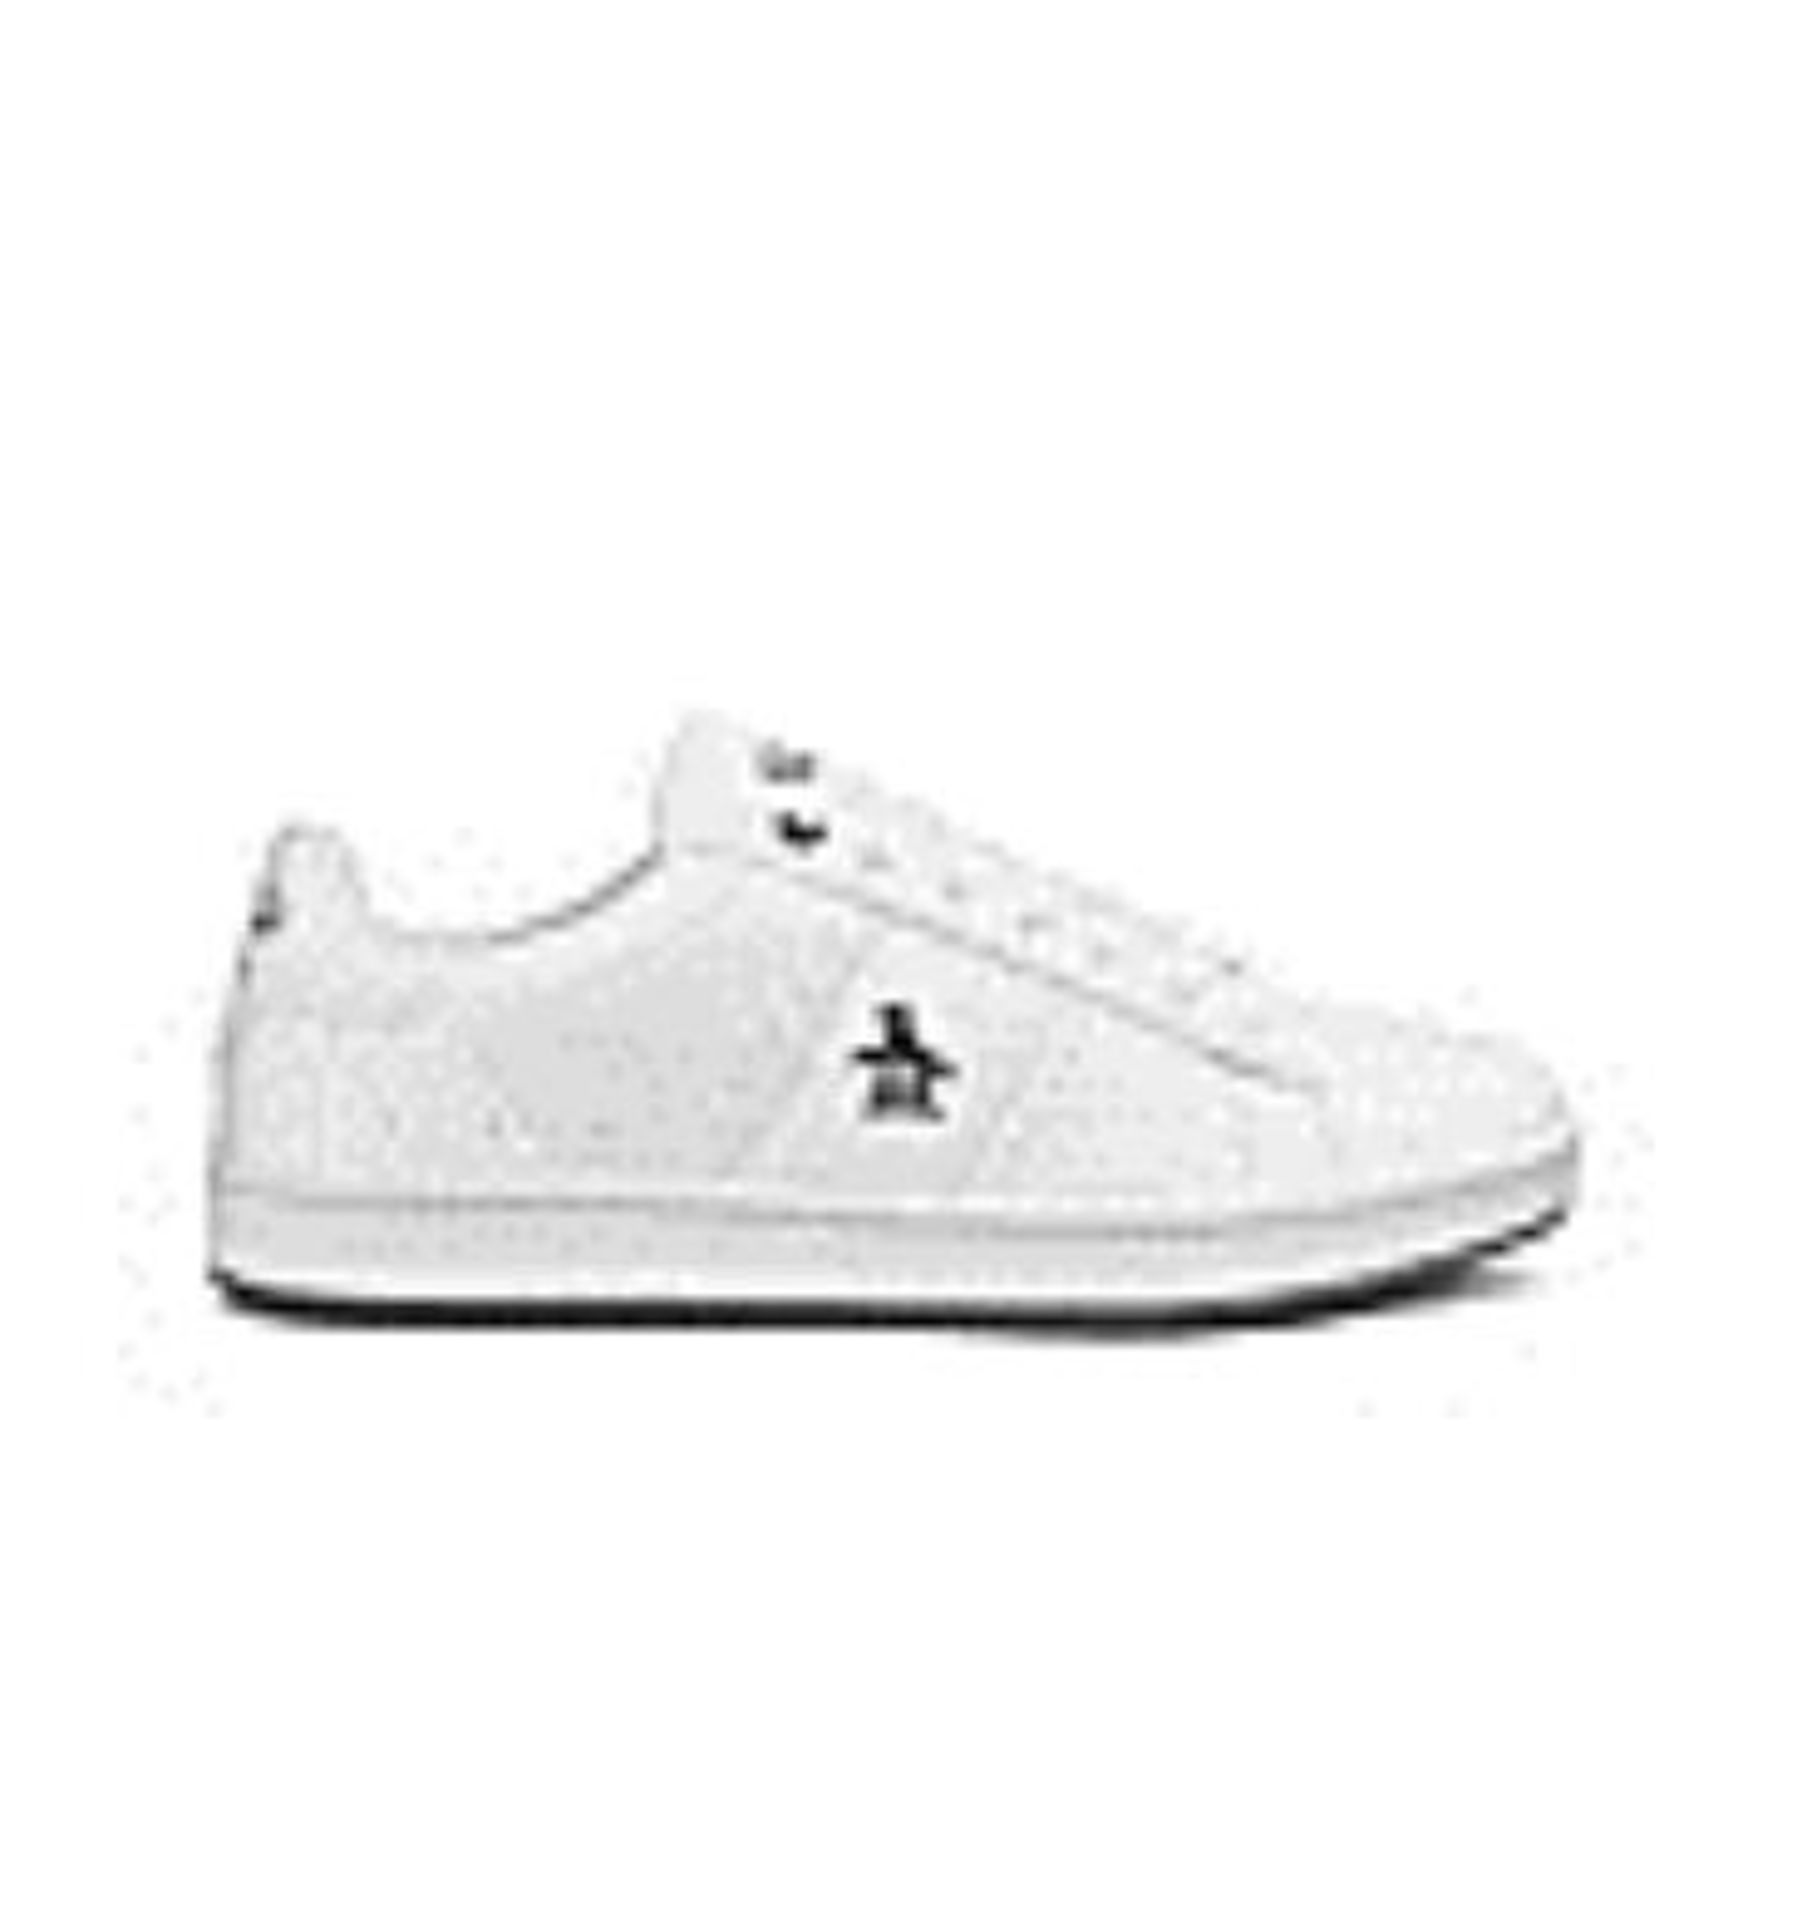 + VAT Brand New Pair Gents White Penguin Trainers Size 7